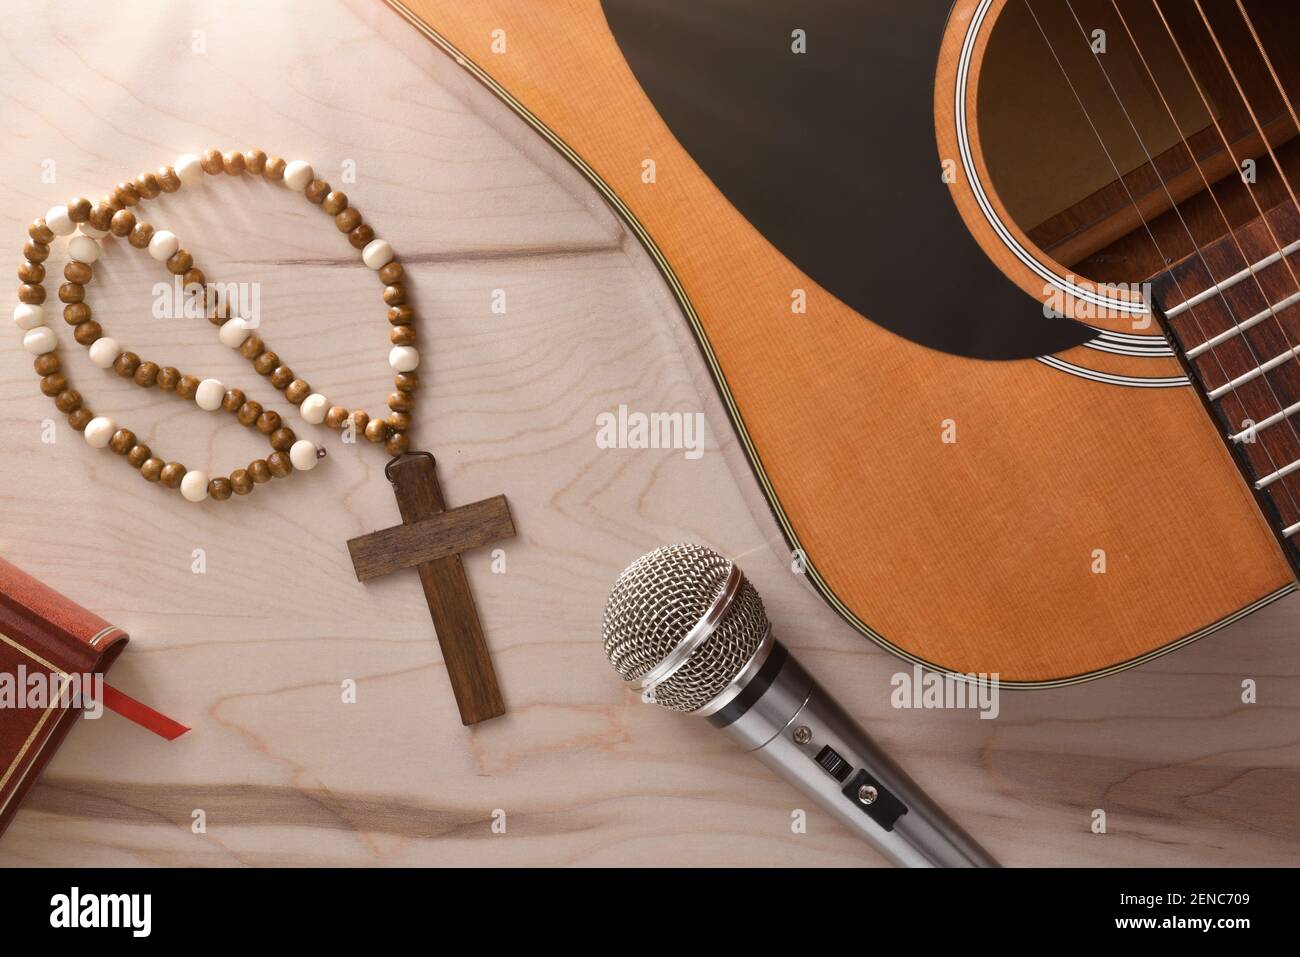 Acoustic guitar and microphone with wooden cross and bible on wooden table close up. Top view. Horizontal composition. Stock Photo